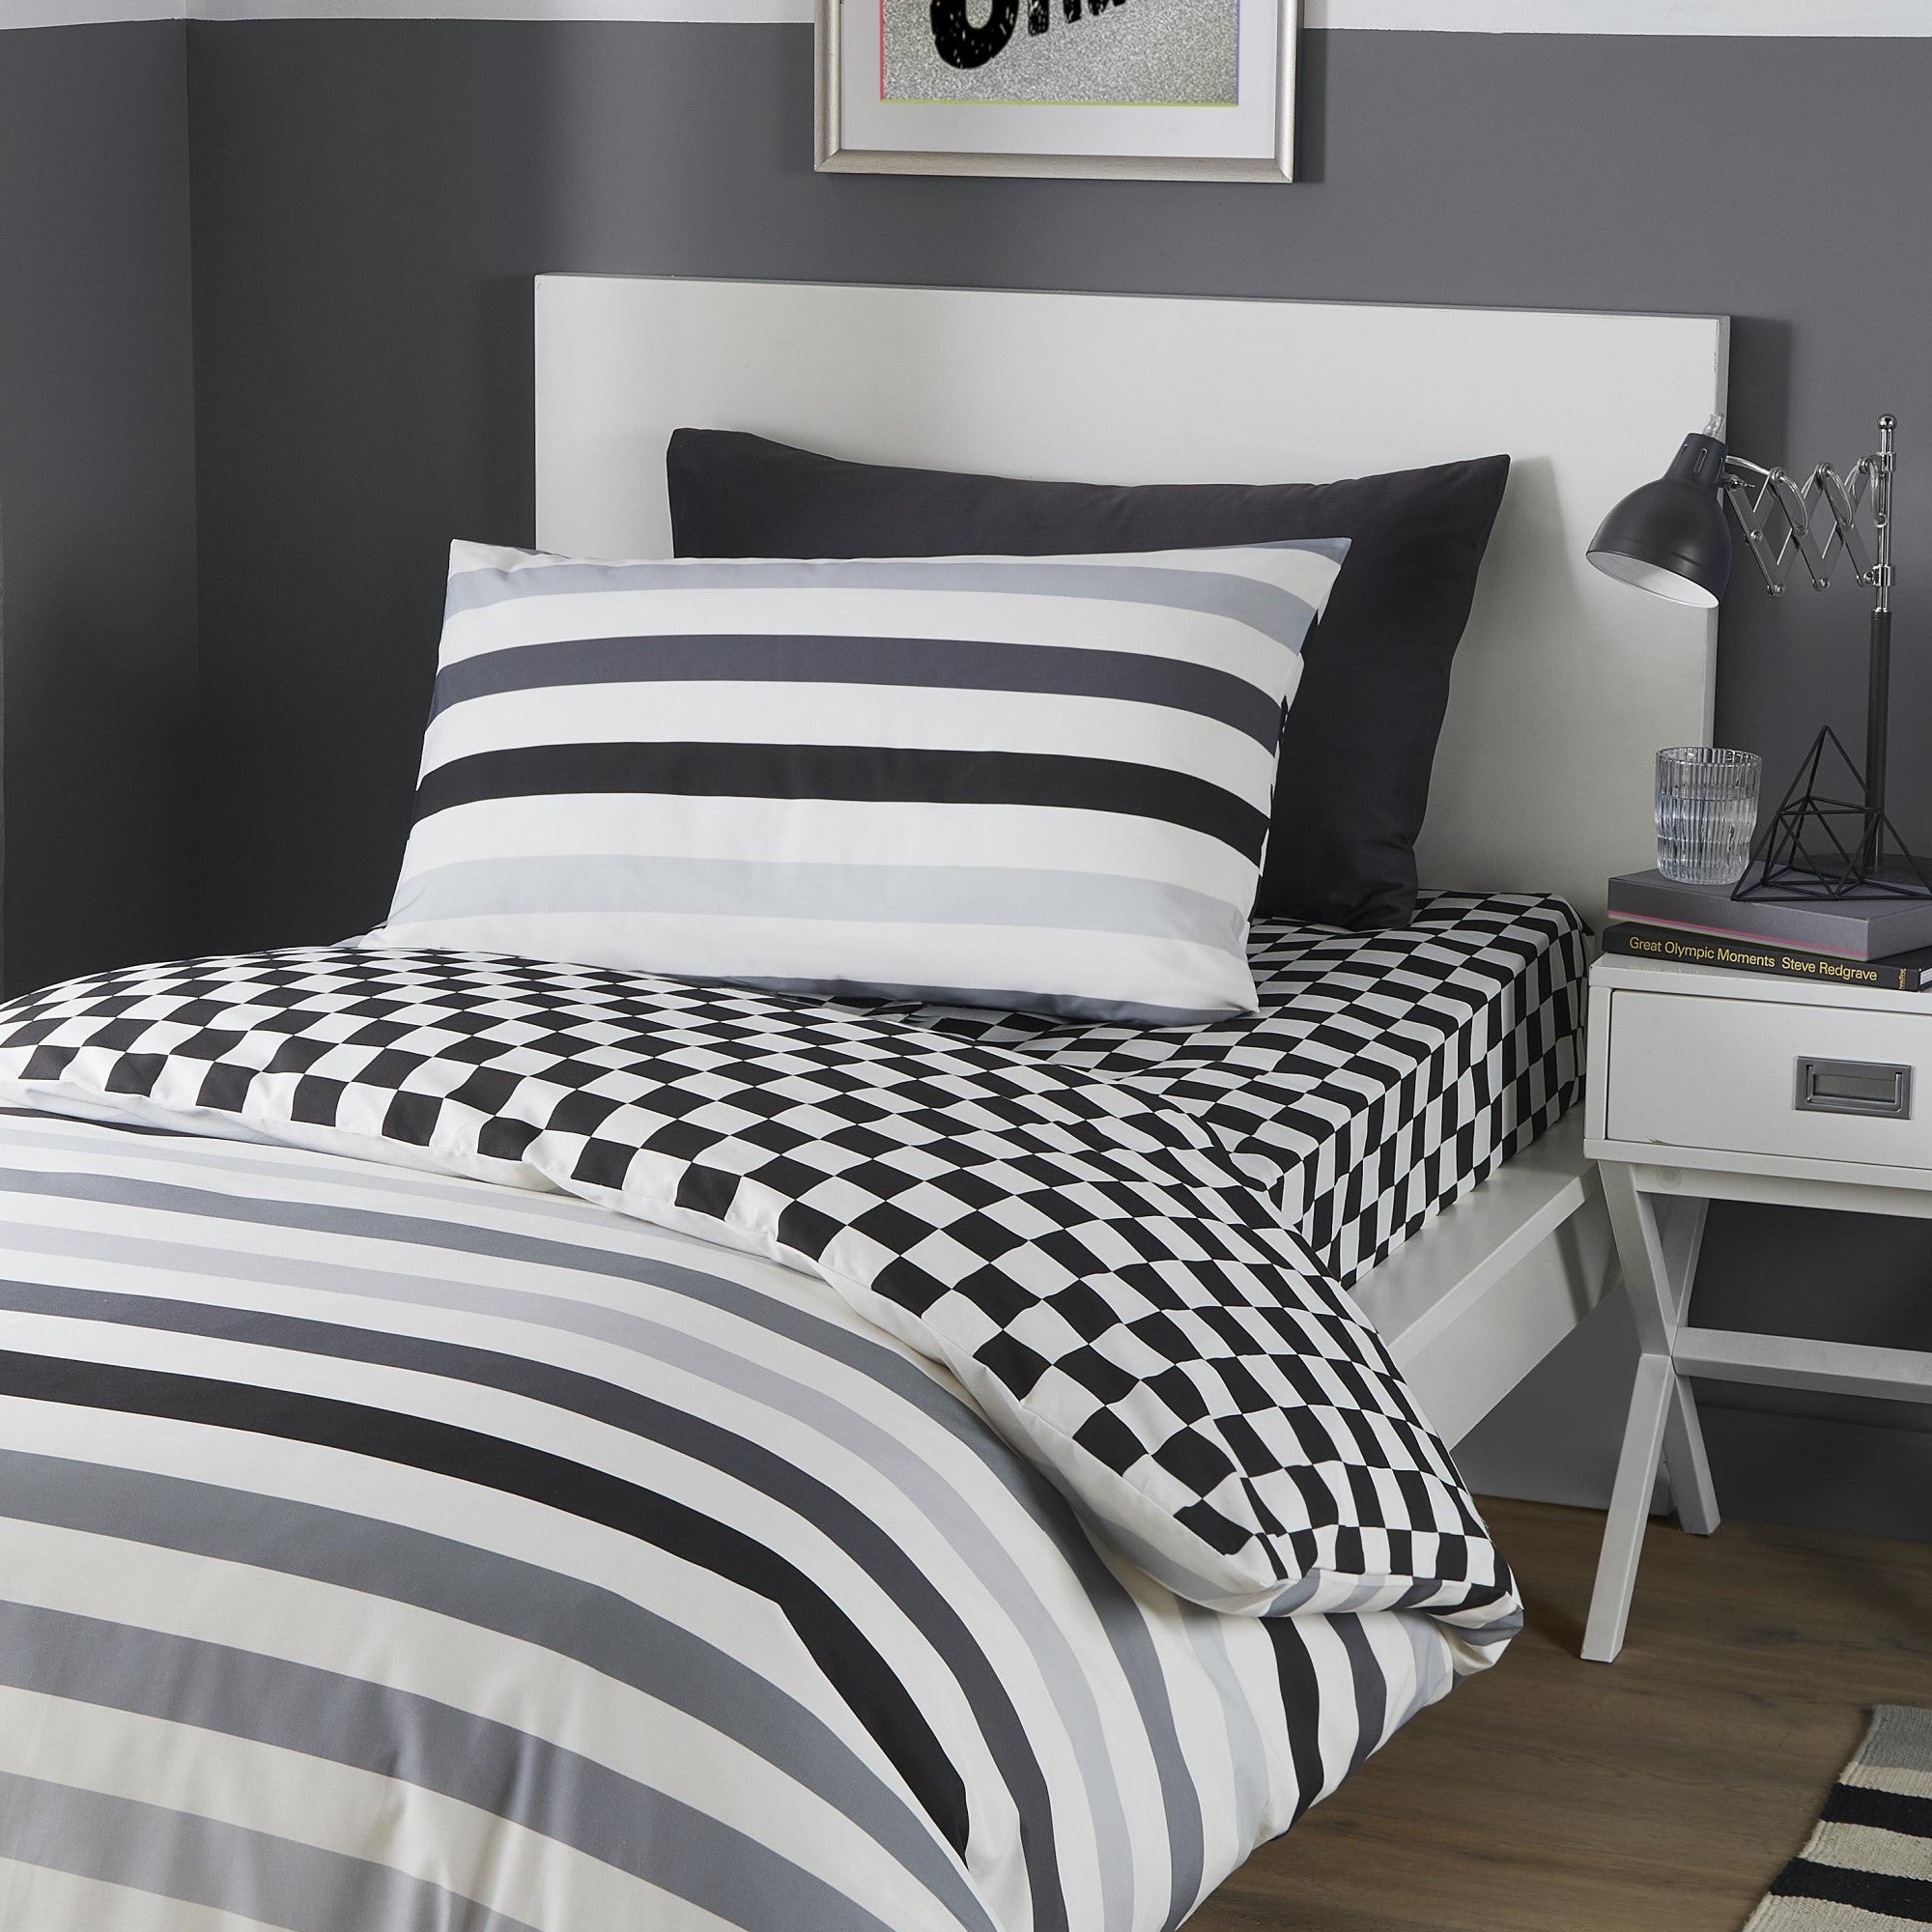 25cm Fitted Bed Sheet Beckett Stripe by Bedlam in Monochrome